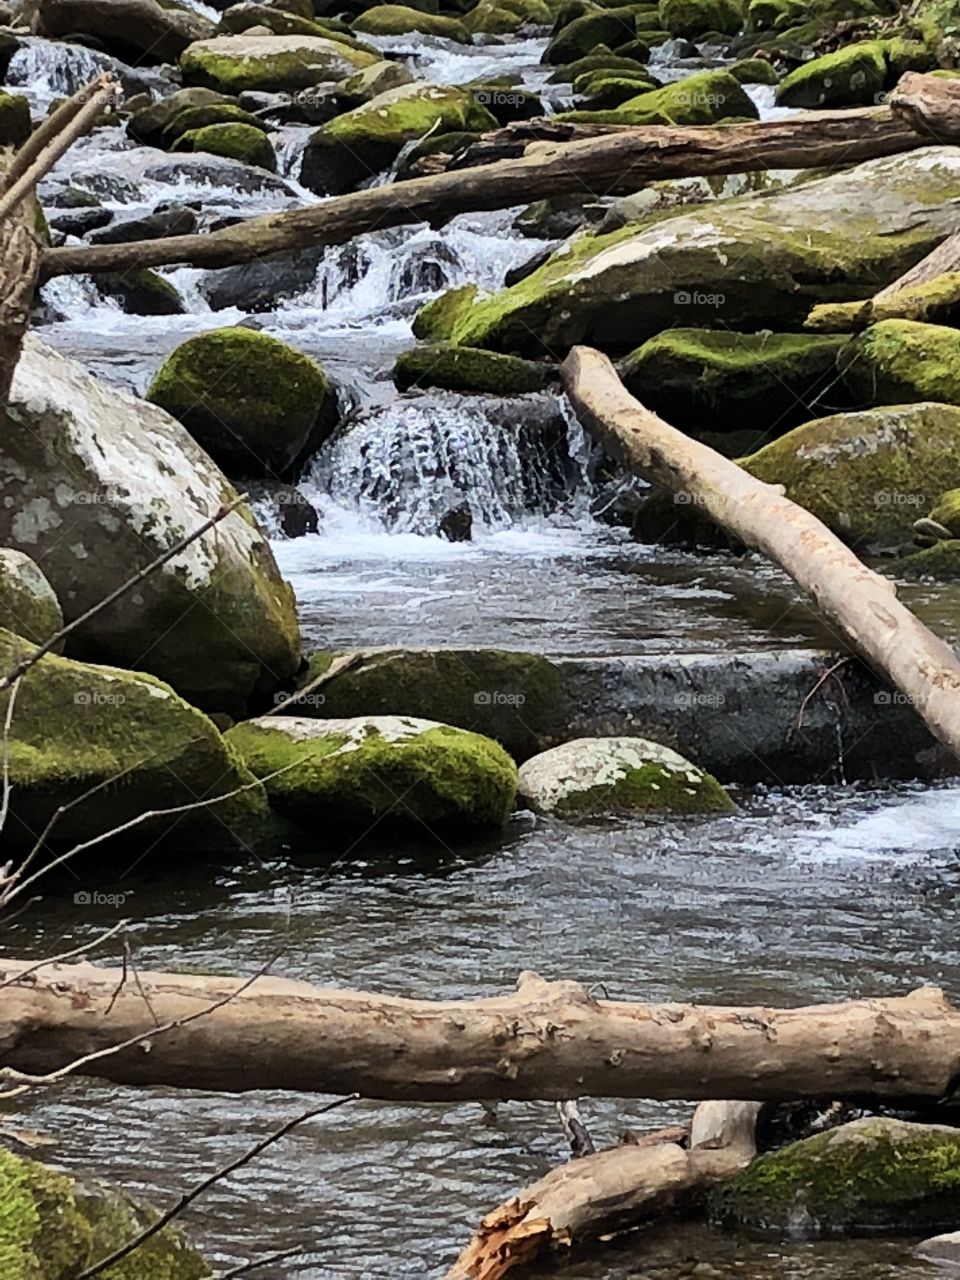 A water stream in the Smokey Mountains, featuring miss’s covered rocks, flowing water, logs positioned by nature to intrigue the eye. 